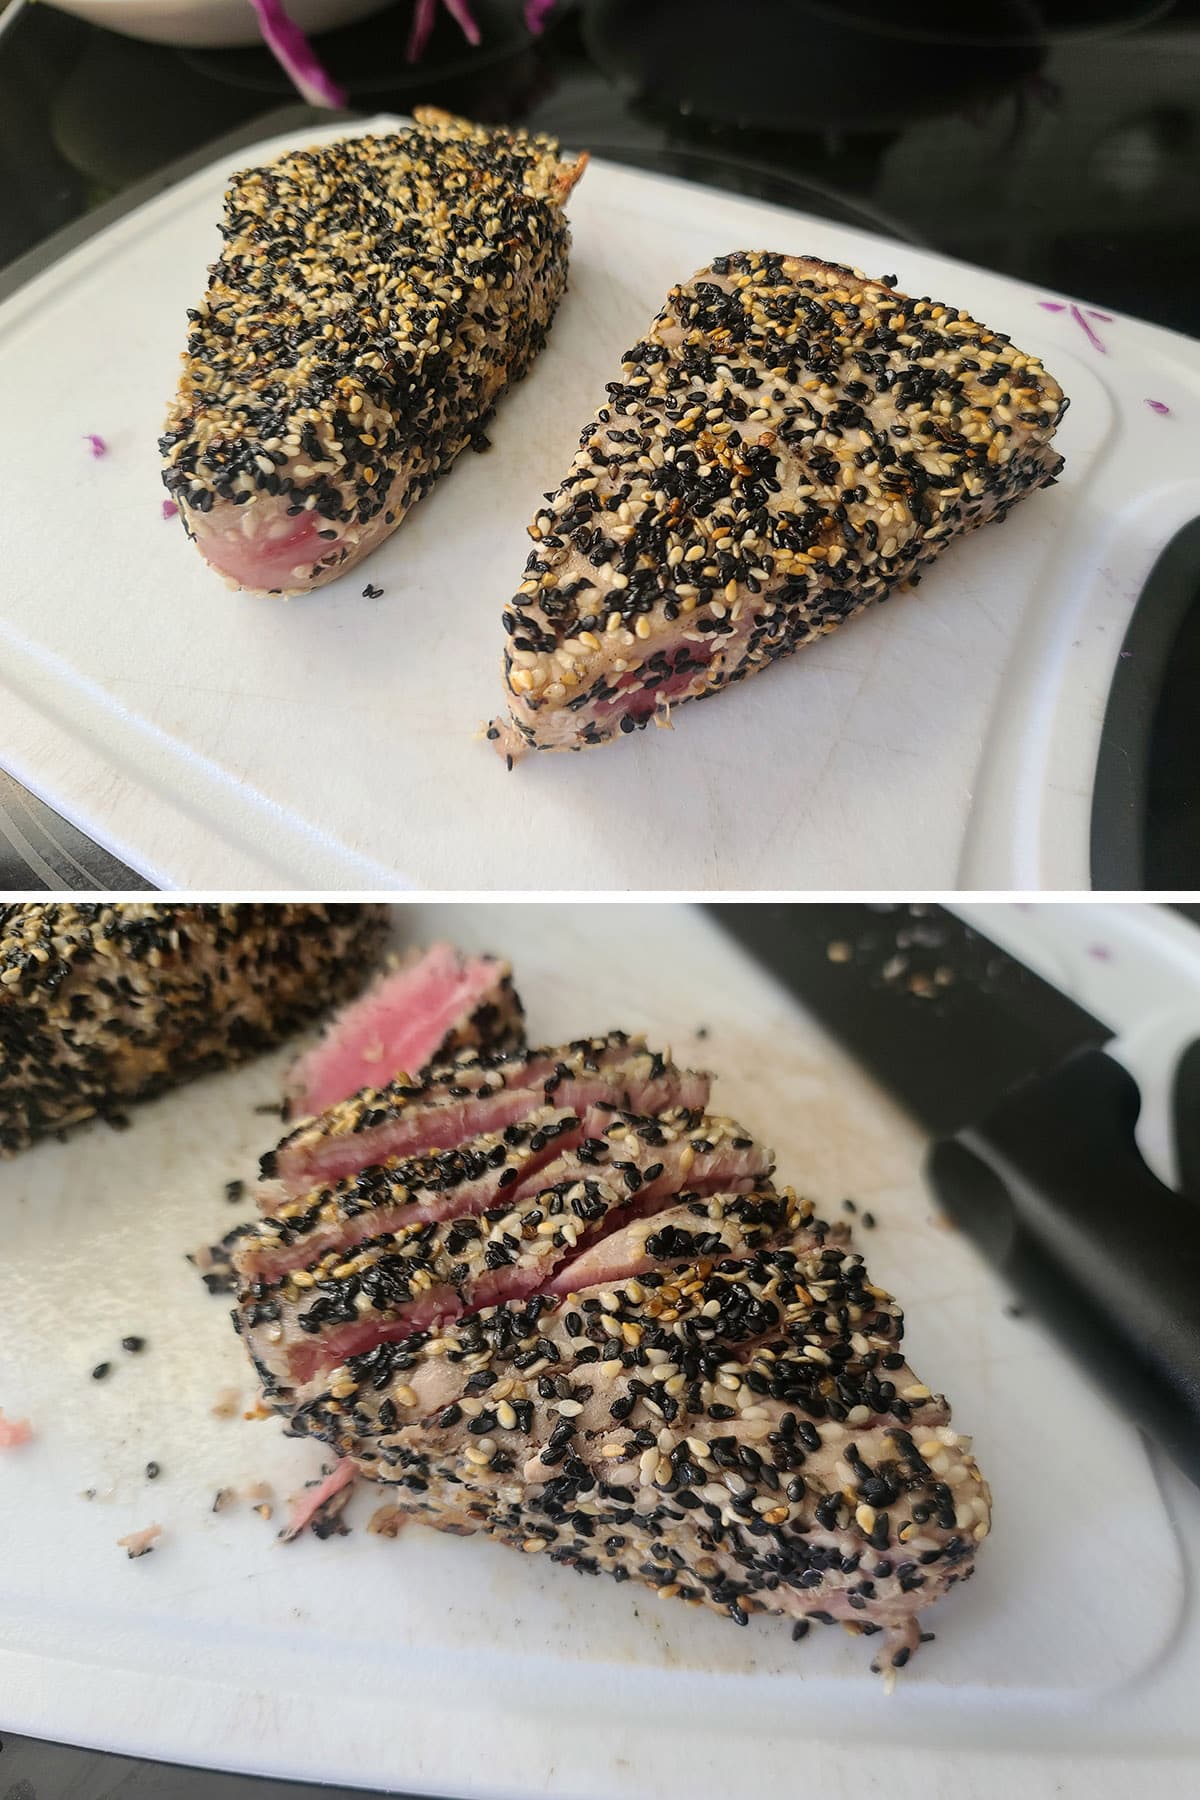 A 2 part image showing a sesame crusted tuna steak being sliced on a cutting board.